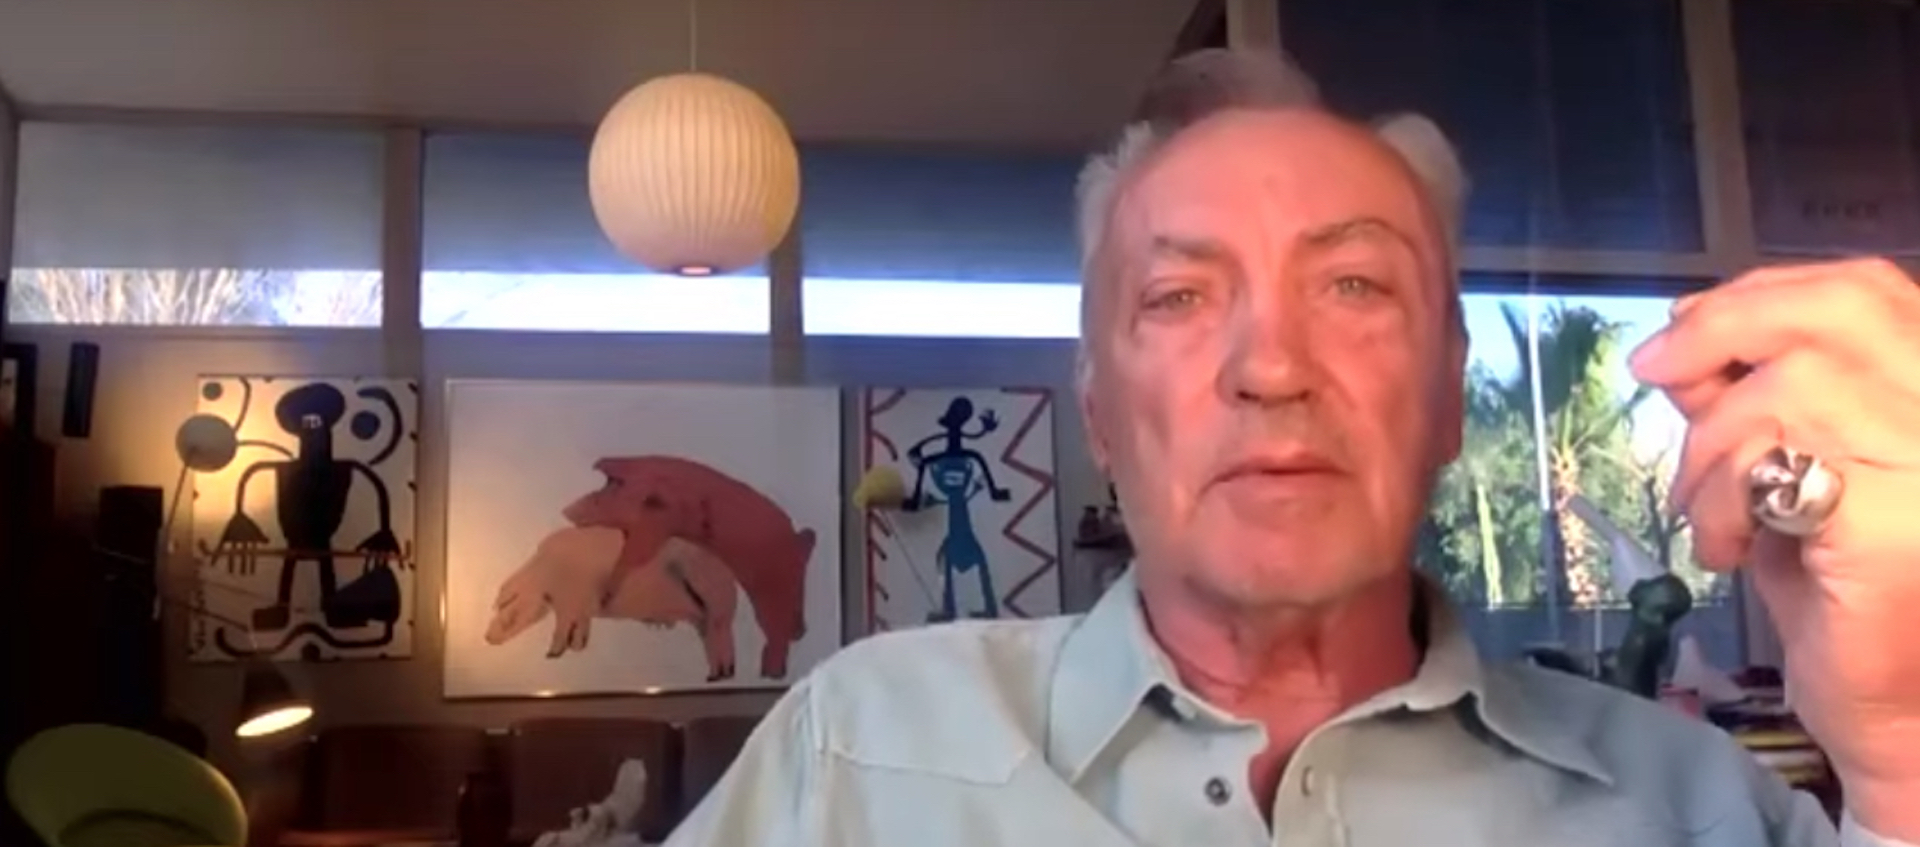 Actor Udo Kier speaking from his home about the film Bacurau